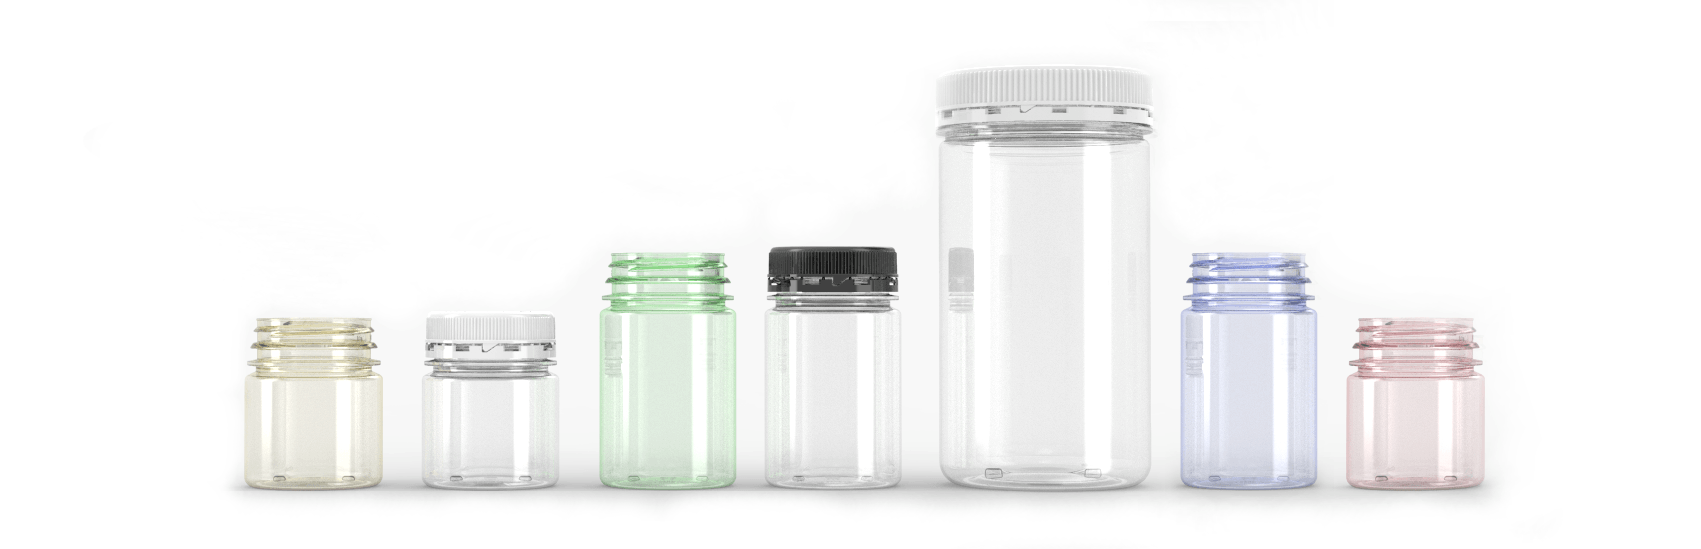 Row of clear multicolored plastic jars of varying sizes.